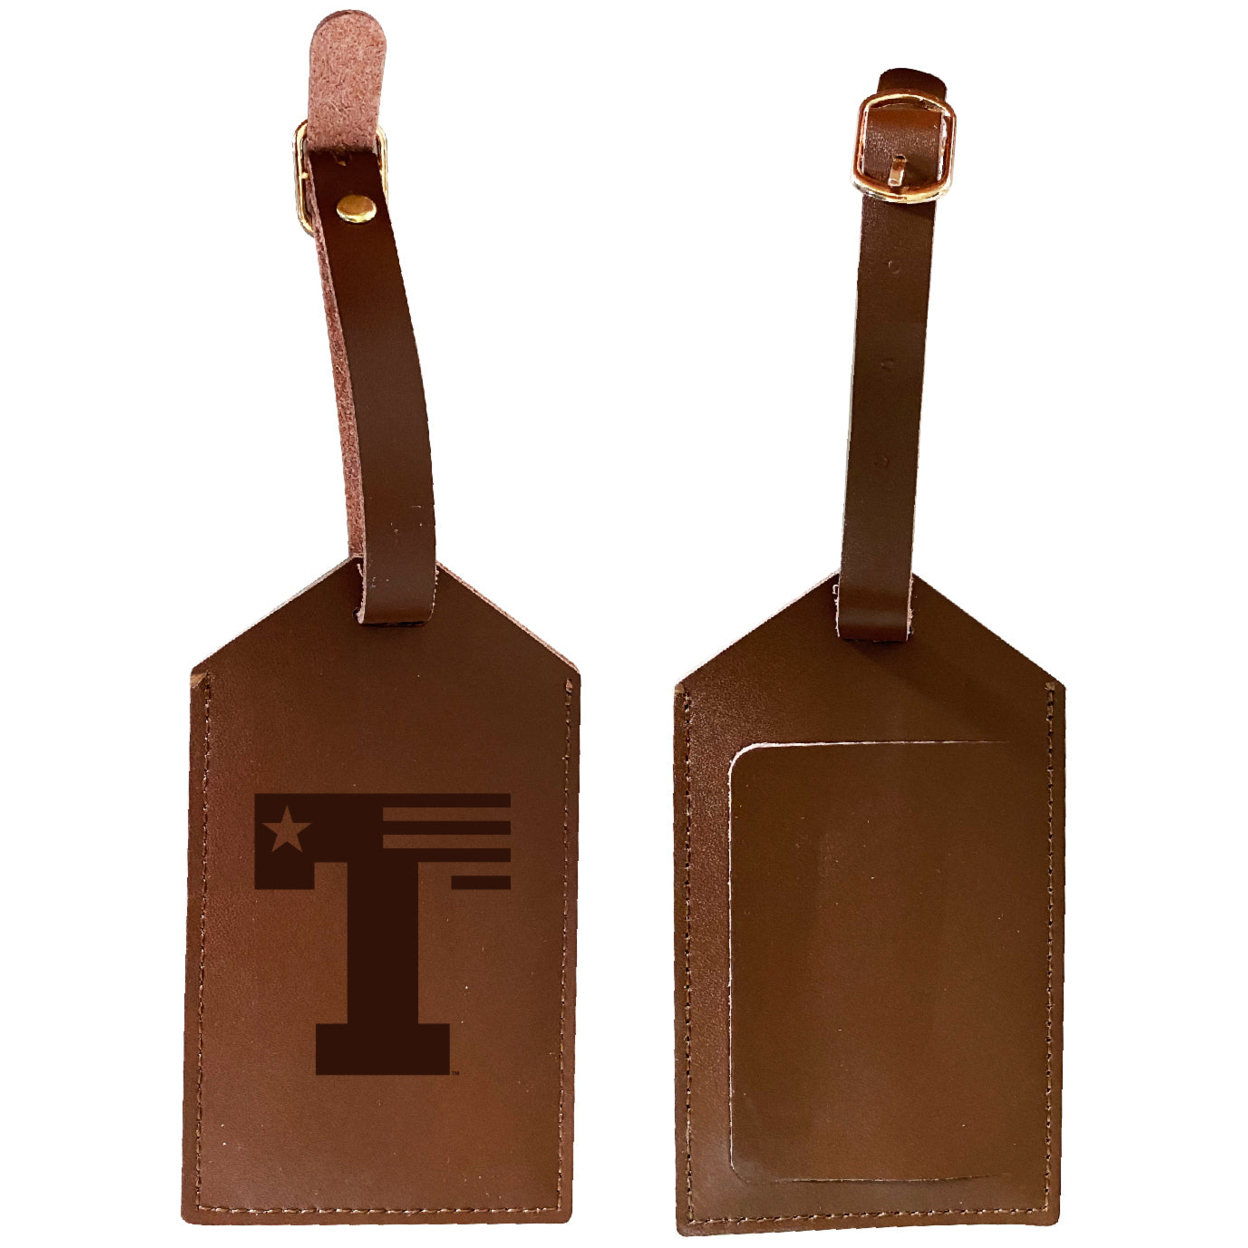 The University Of Texas At Tyler Leather Luggage Tag Engraved